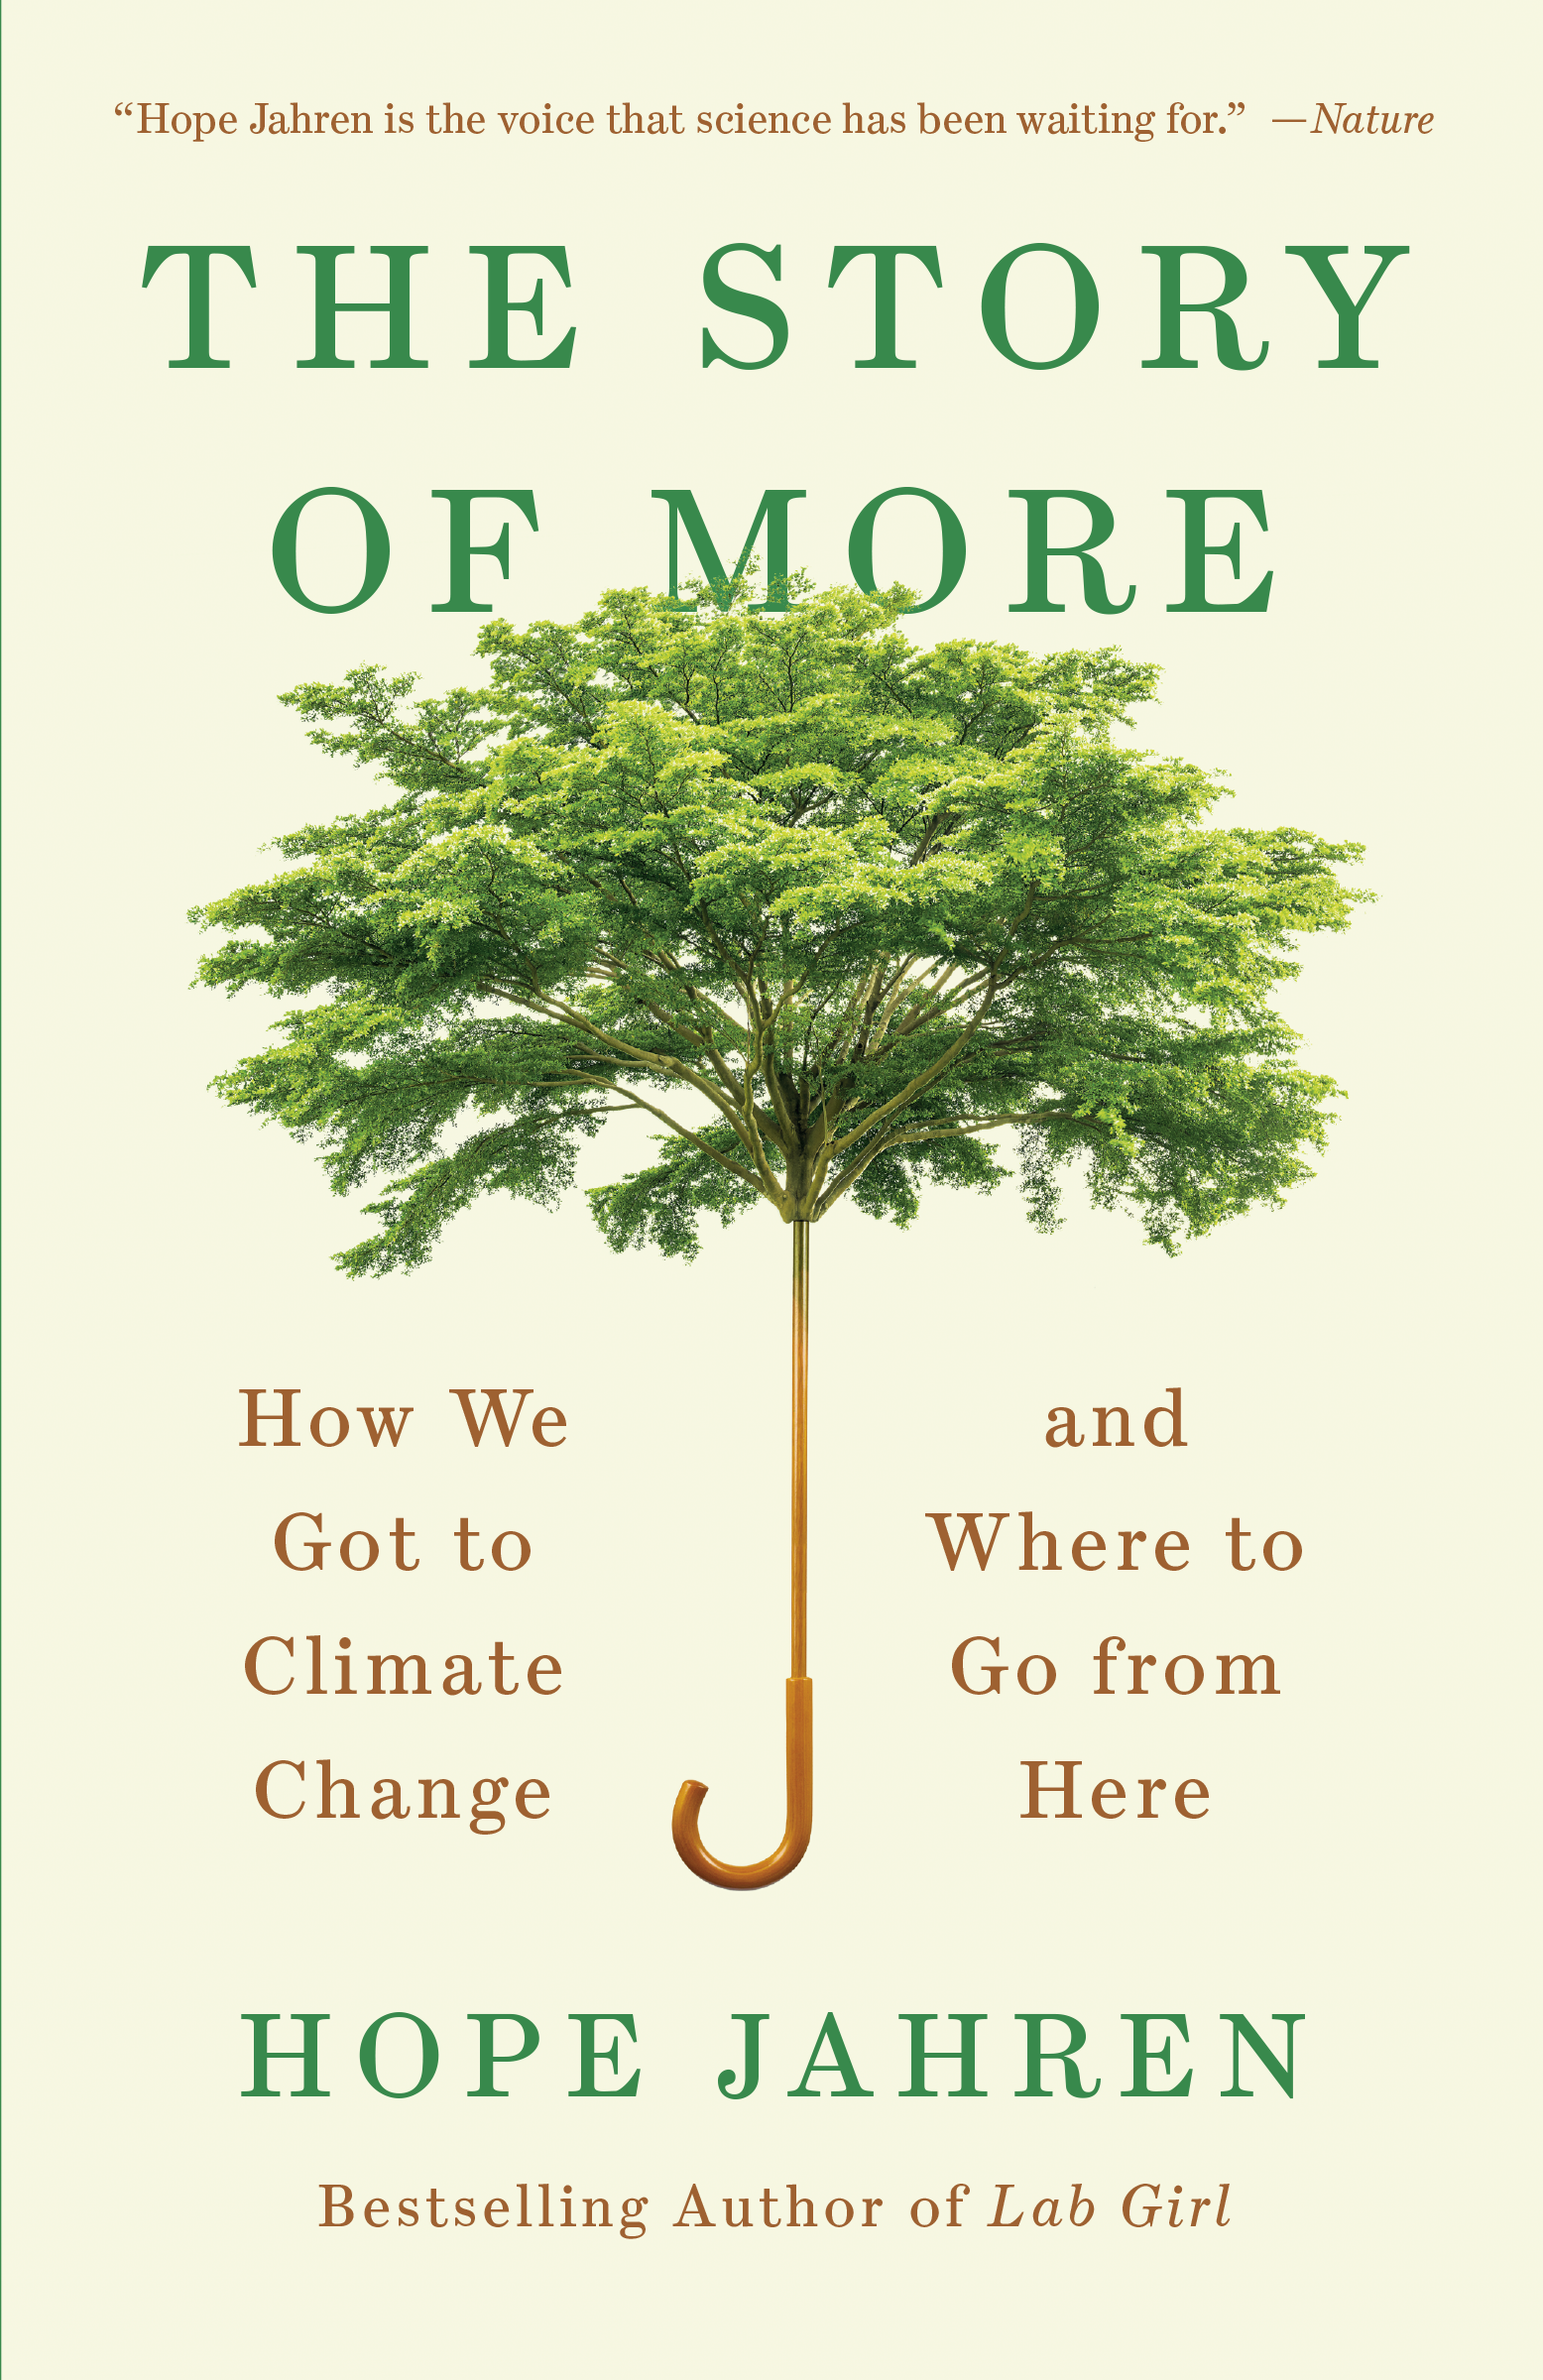 The cover of The Story of More.